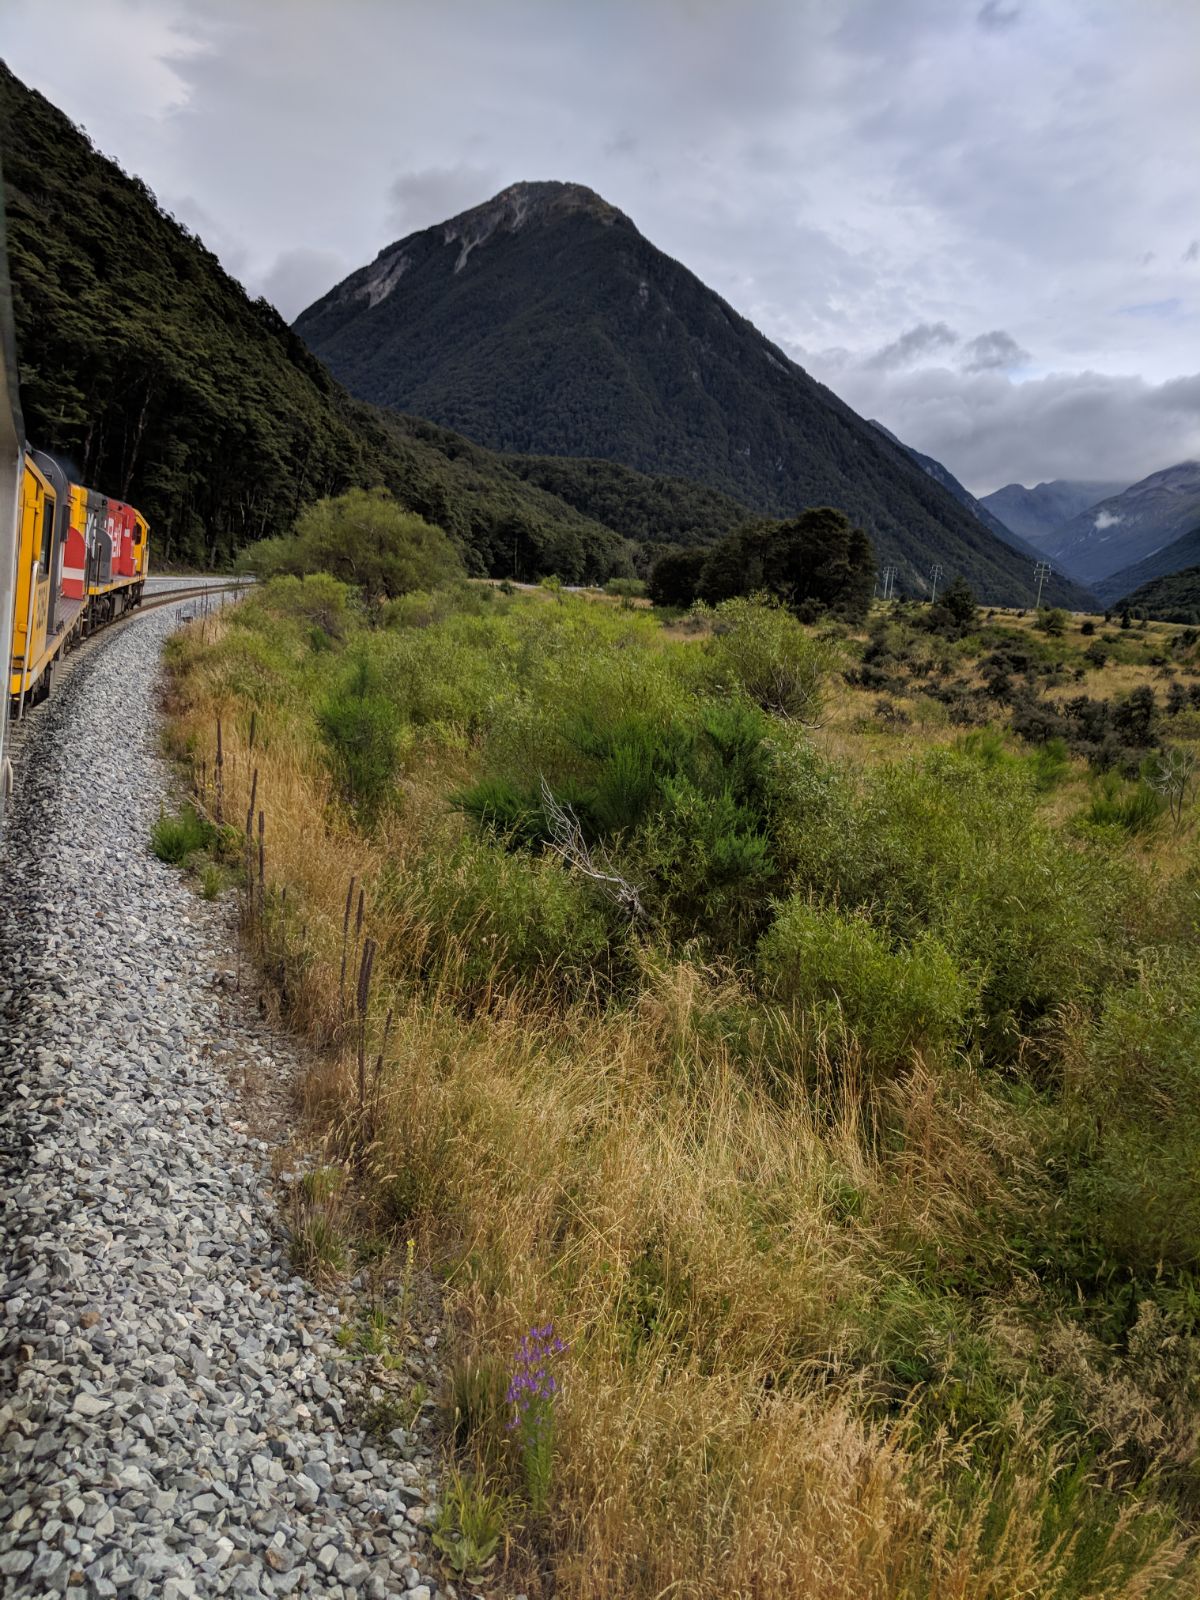 126--the next day I left Christchurch on the transalpine train headed for Greymouth